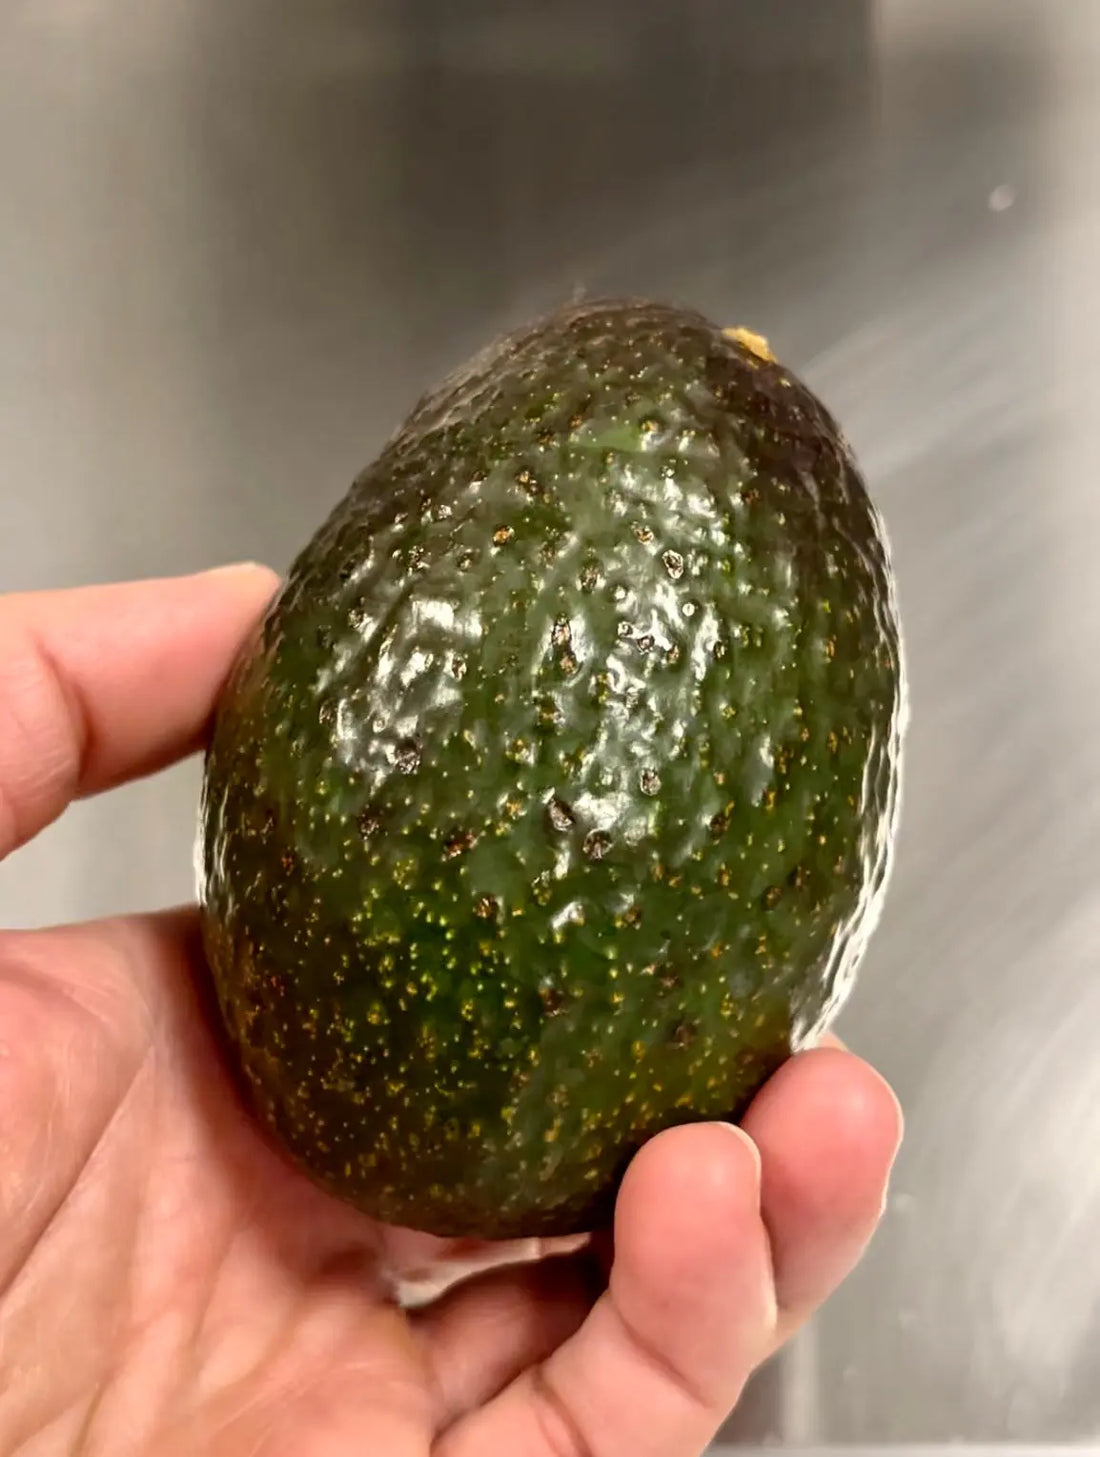 Superfood or a Humble Avocado?